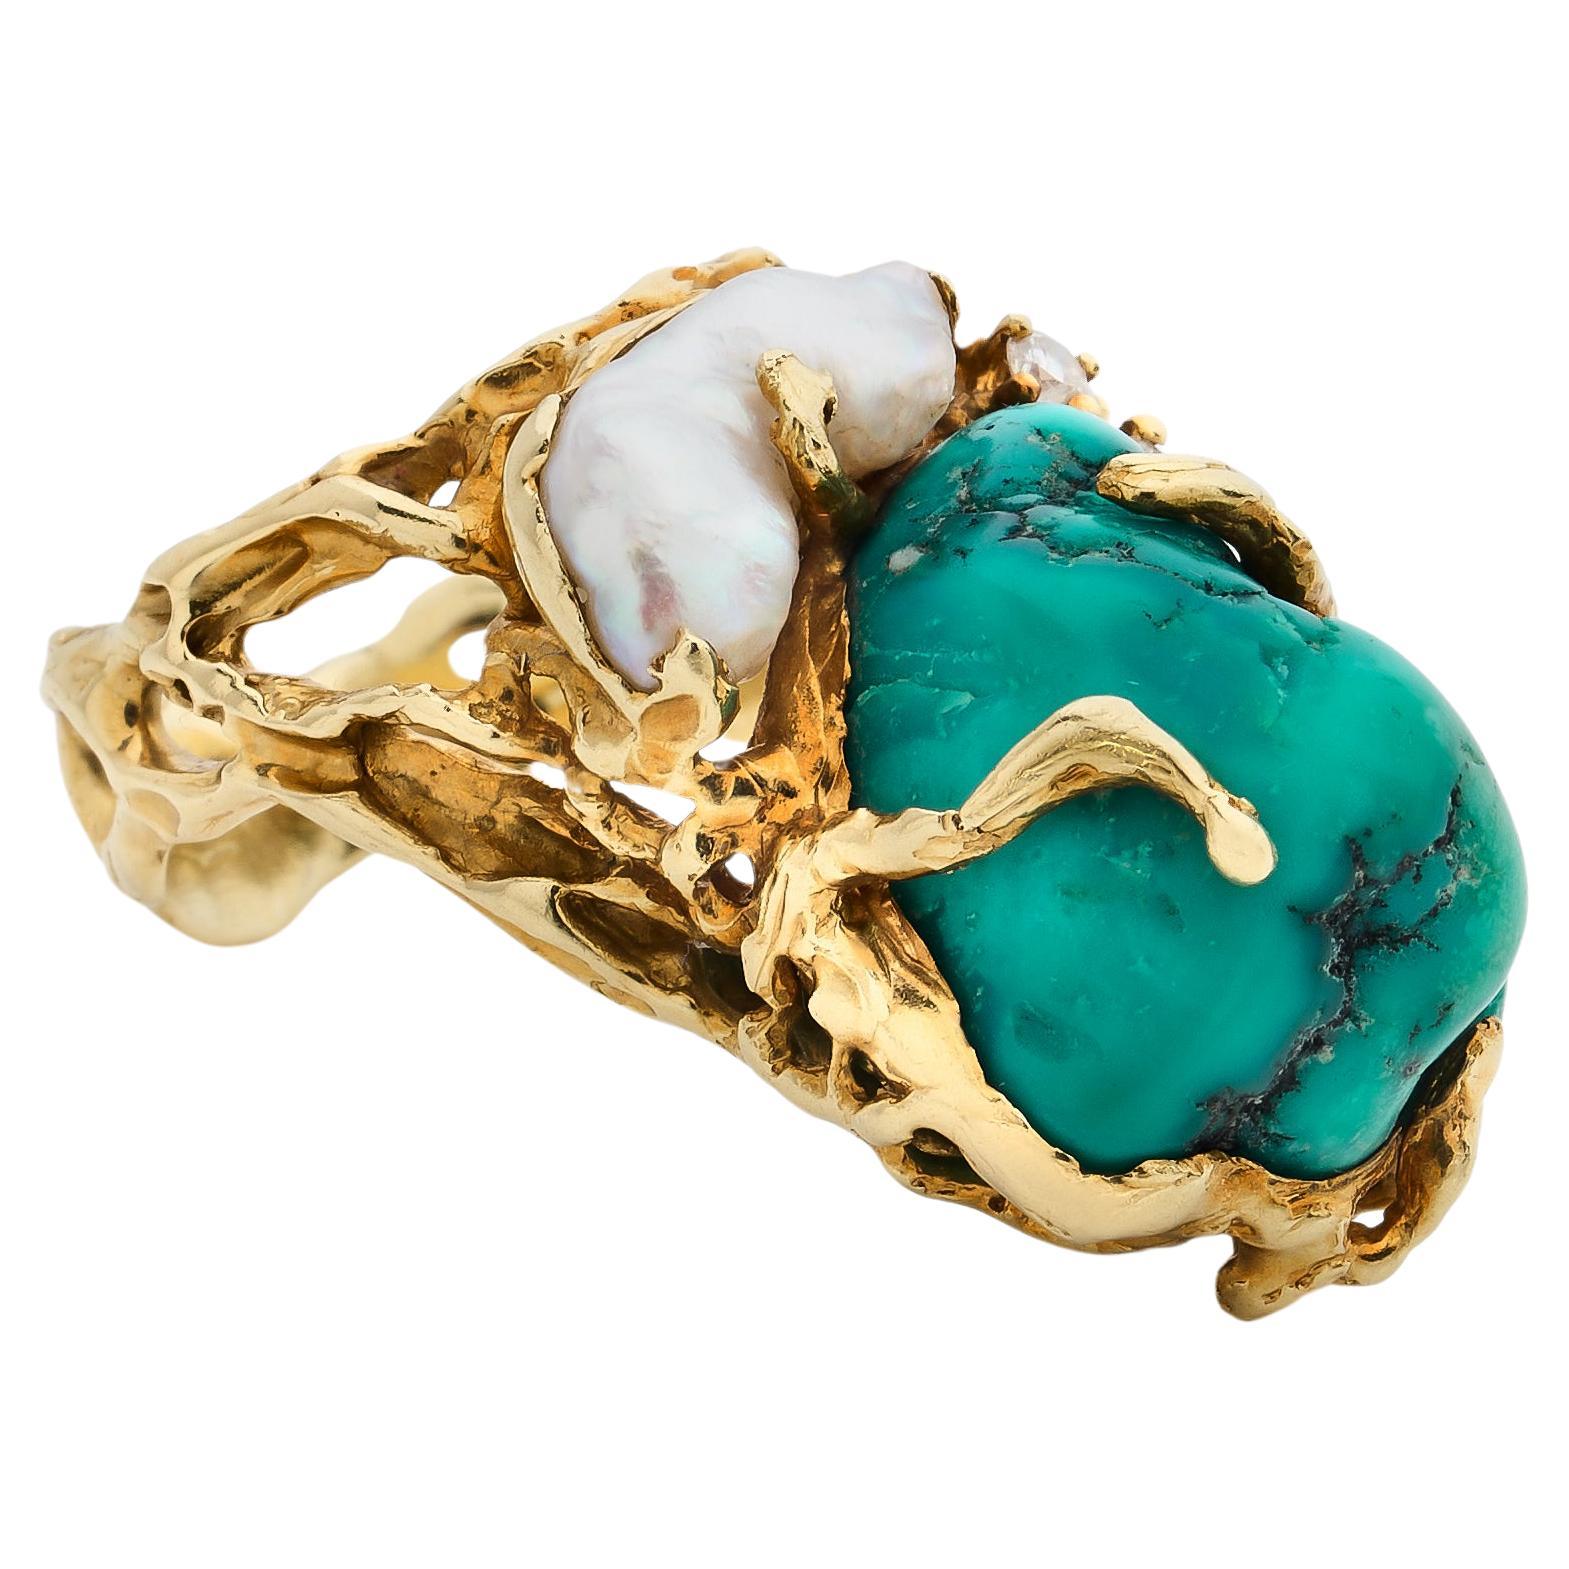 Gilbert Albert Sculptural Ring with Turquoise and Baroque Pearl